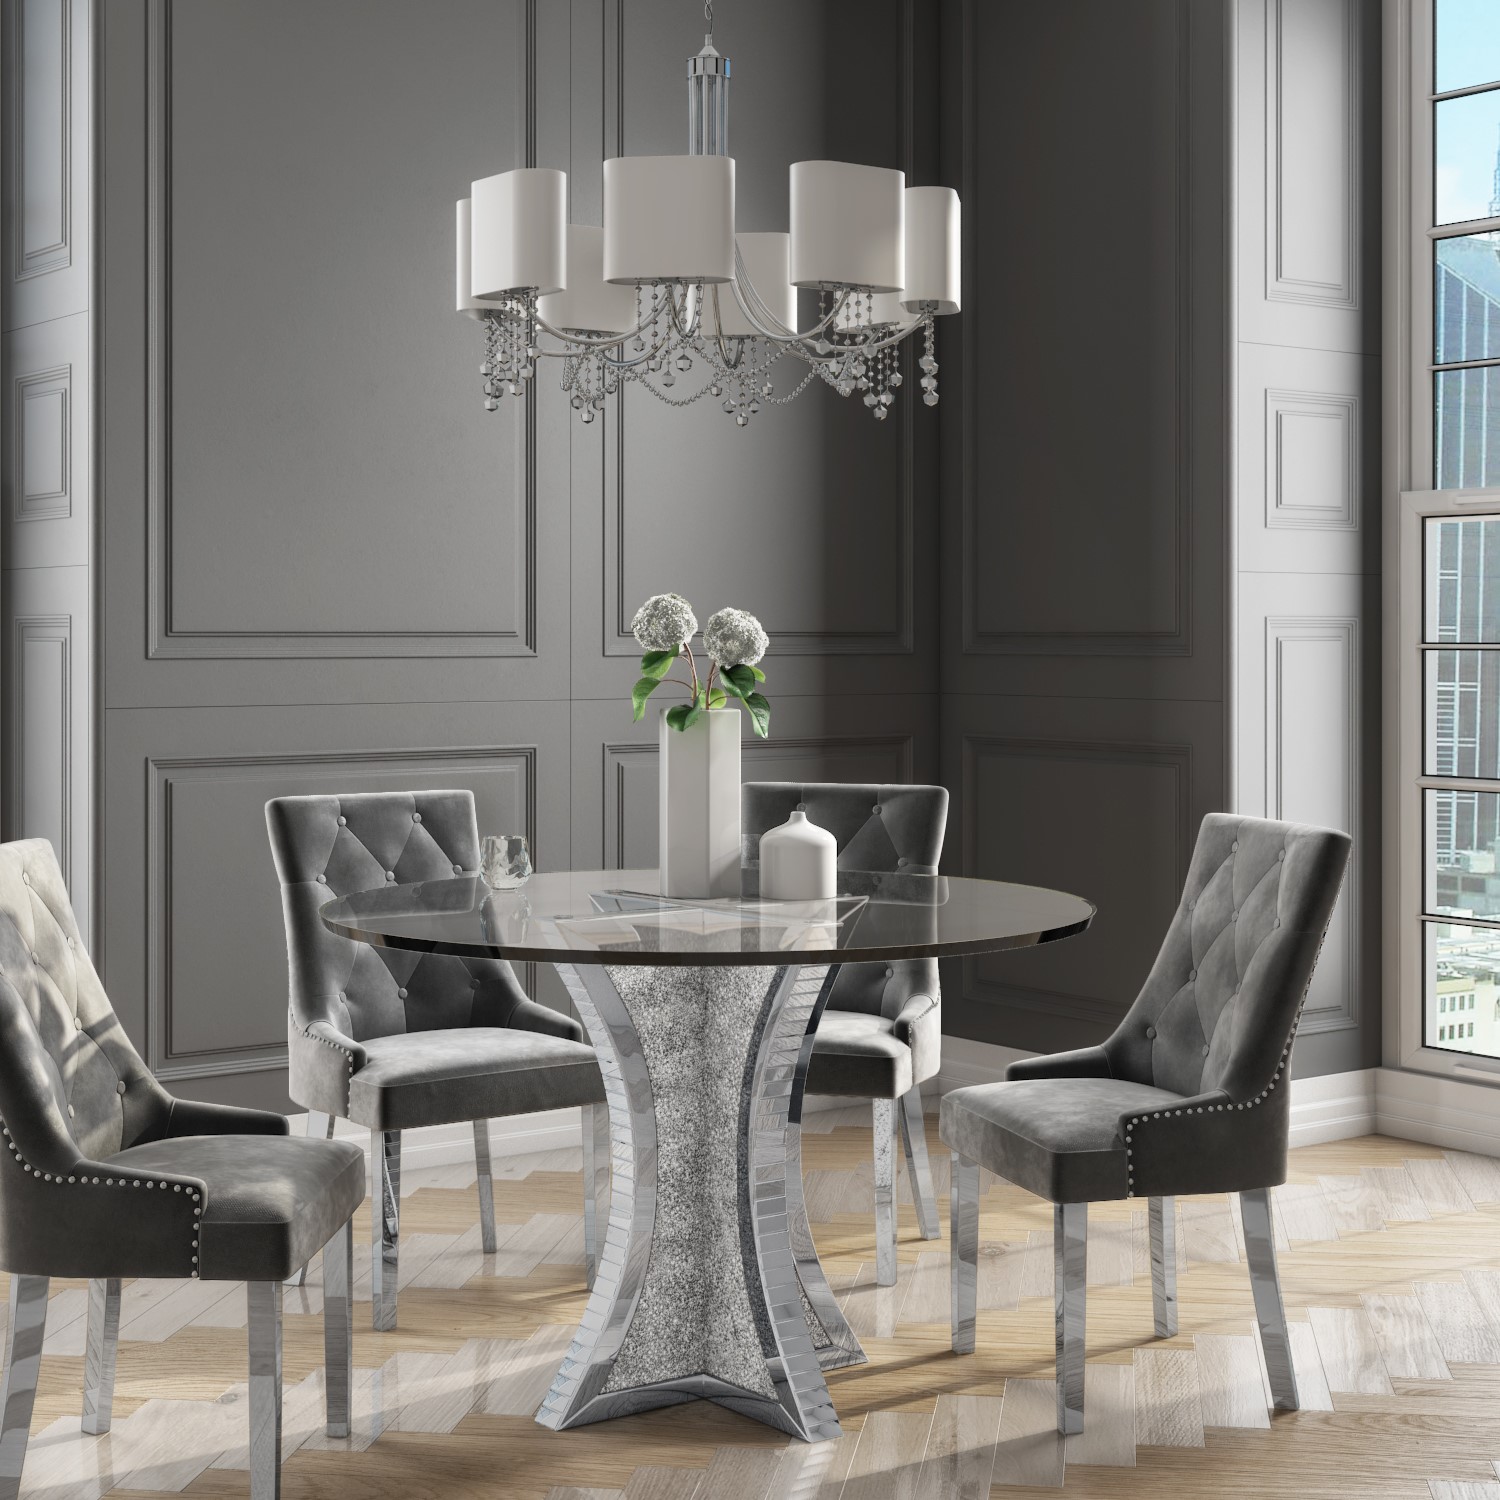 Round Mirrored Dining Table With Glass Top Crushed Diamond Effect Seats 4 Jade Boutique Furniture123